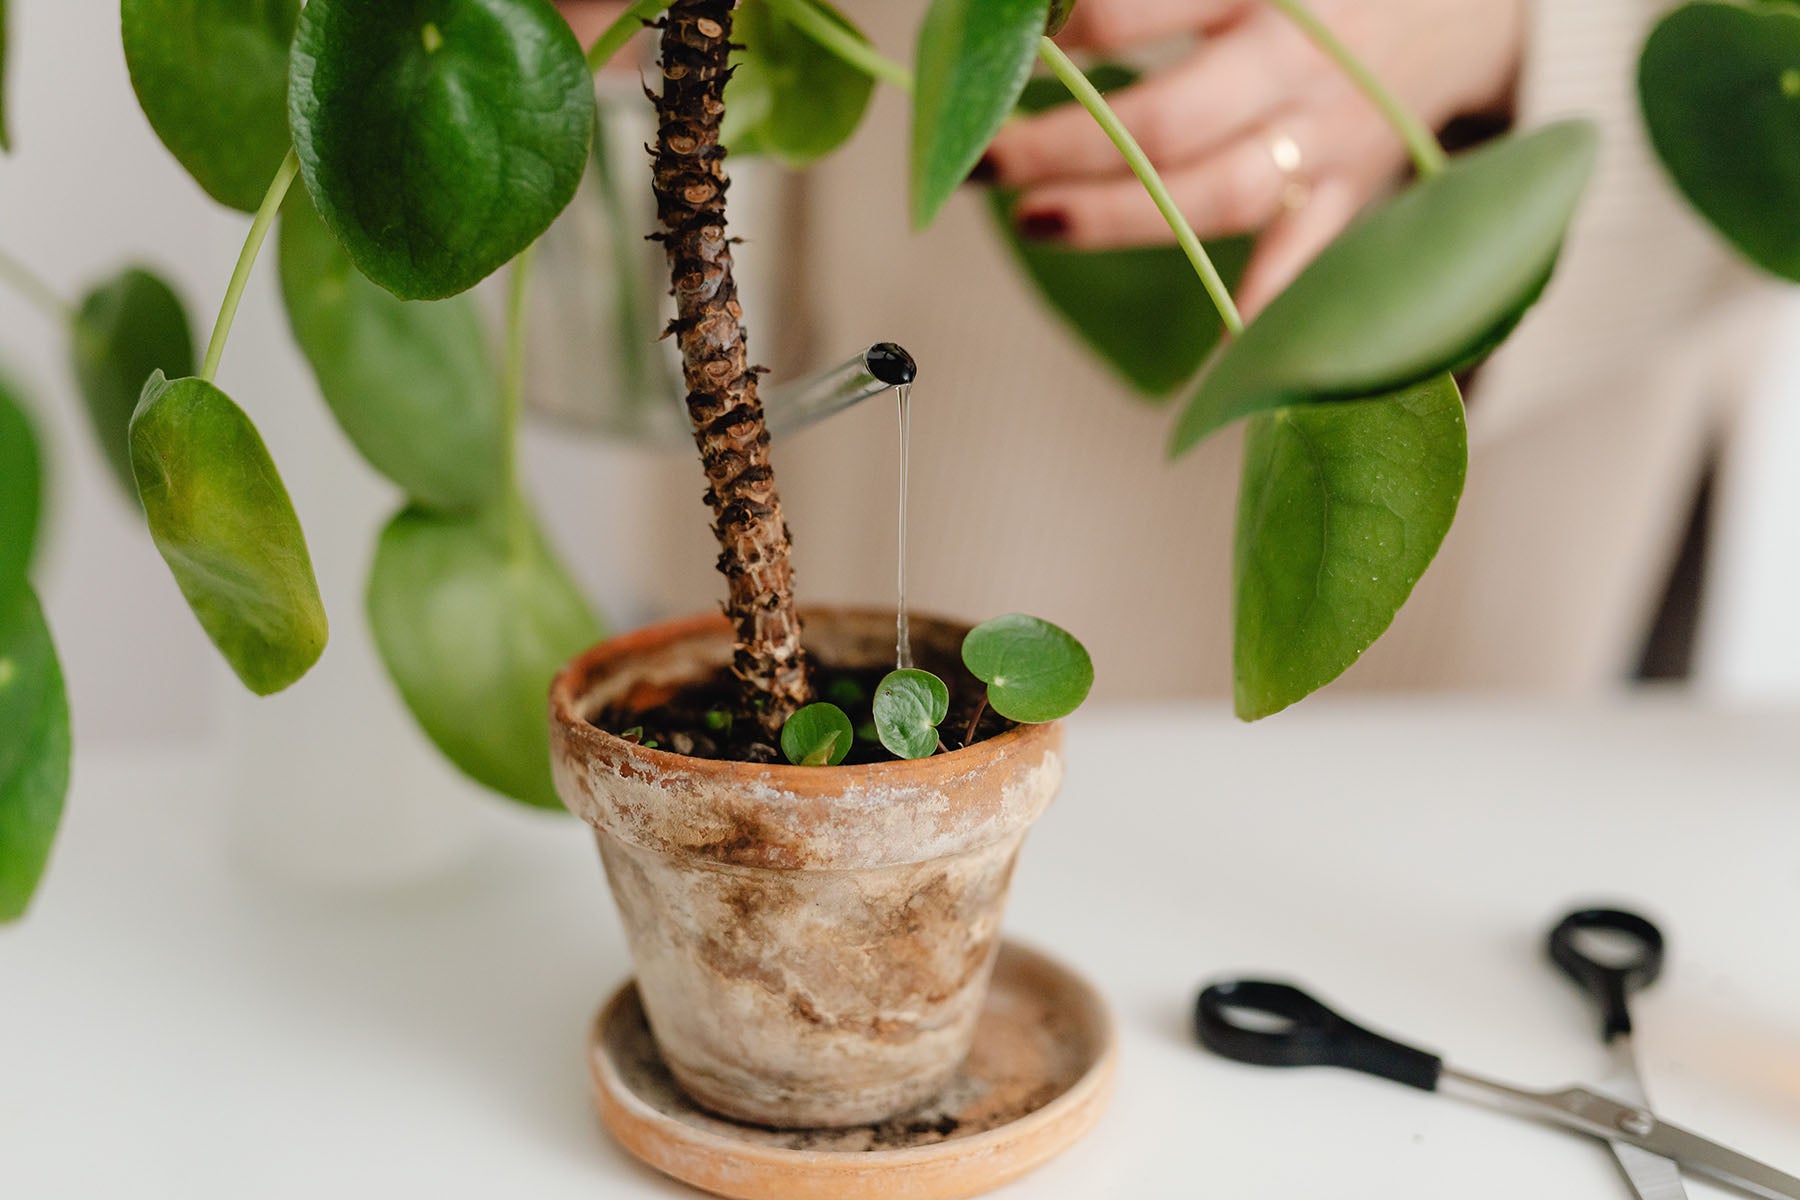 Watering a Pilea plant